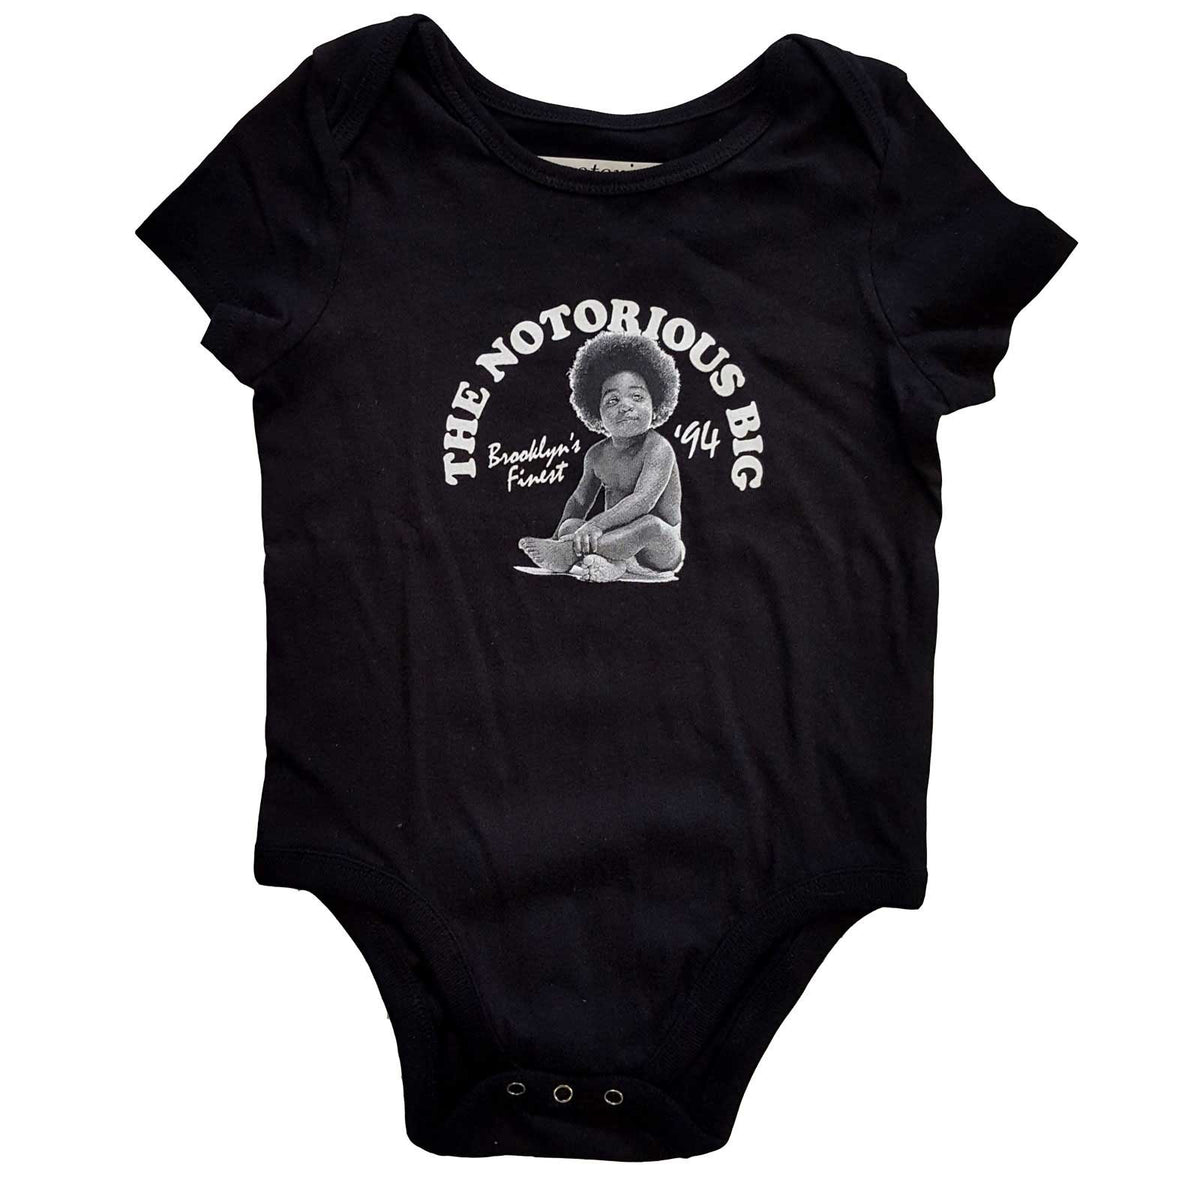 Biggie Smalls Kids Baby Grow - Baby - Official Licensed Product